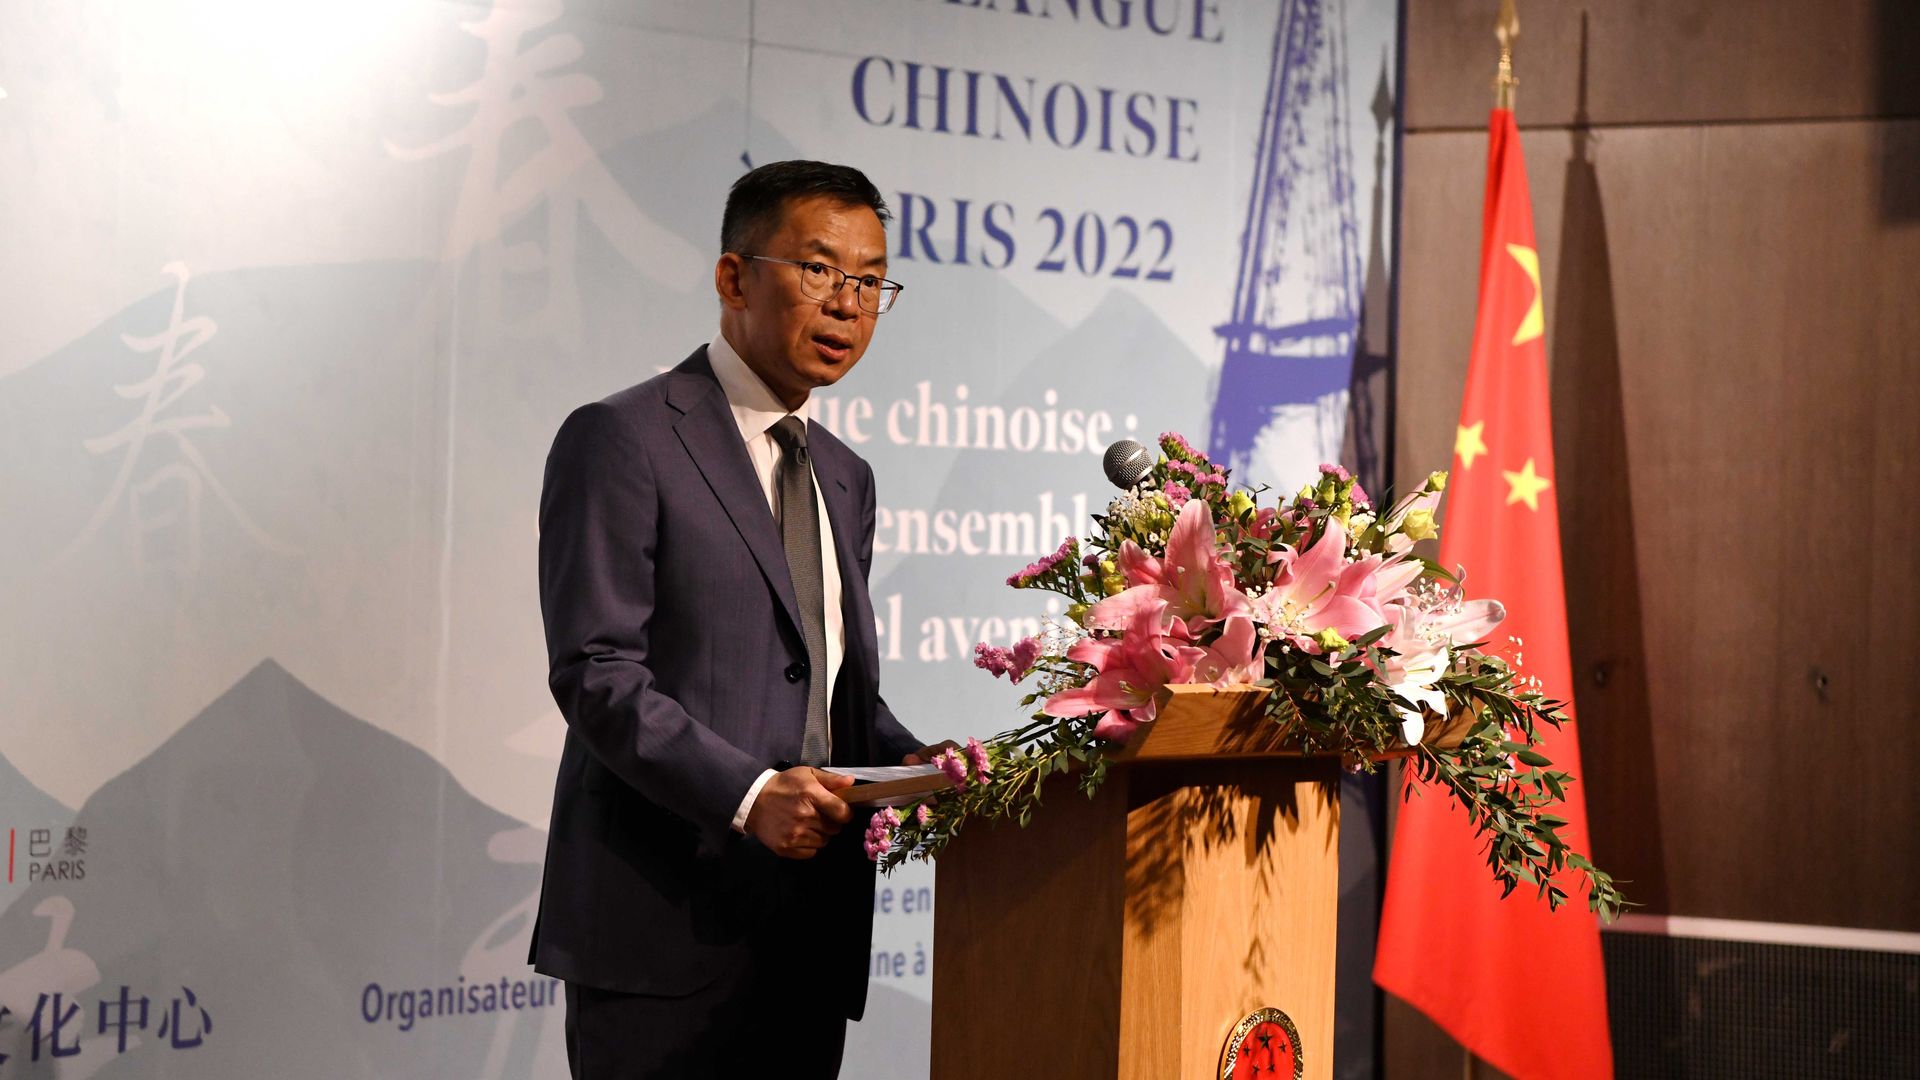 Chinese Ambassador to France Lu Shaye speaks during a celebration for the 2022 United Nations Chinese Language Day at the Chinese Cultural Center on April 21, 2022 in Paris, France.